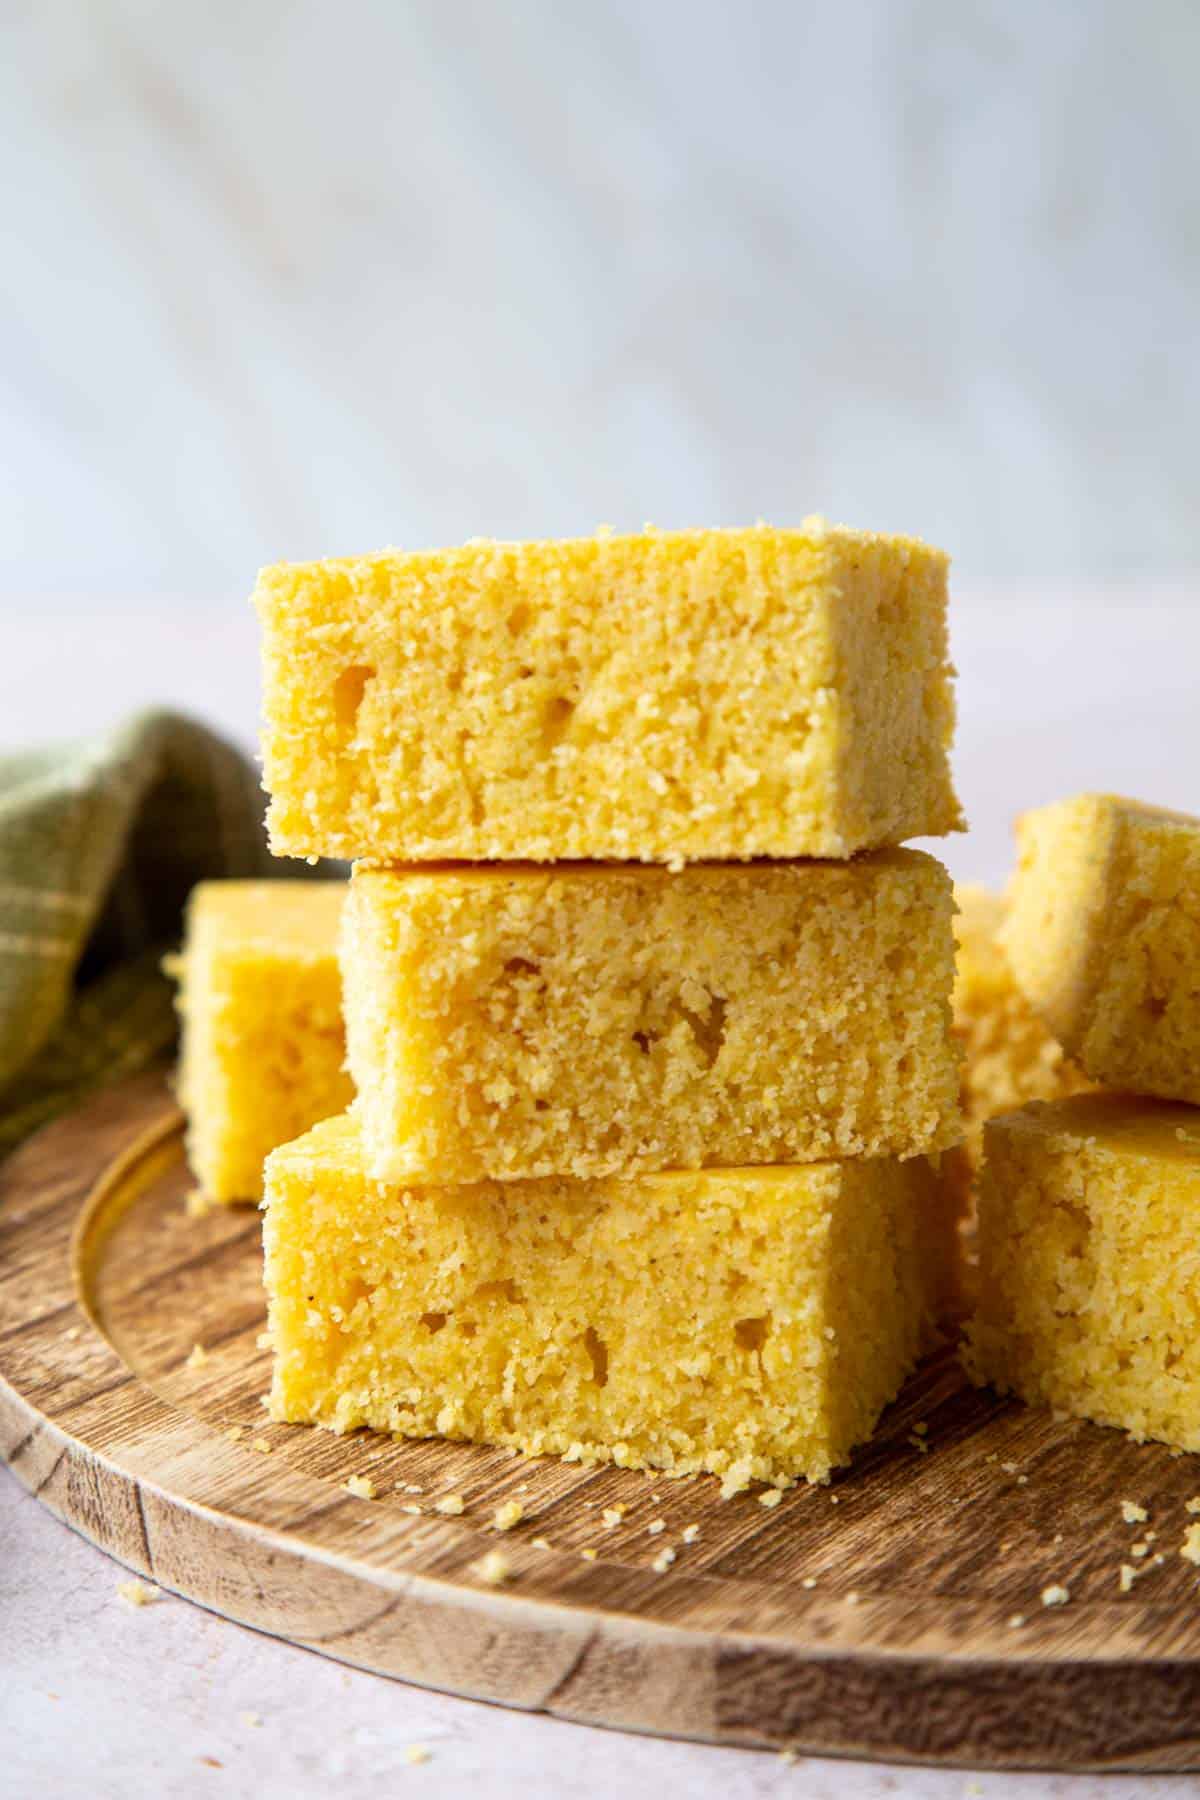 3 slices of cornbread stacked one on top of the other on a wooden surface.